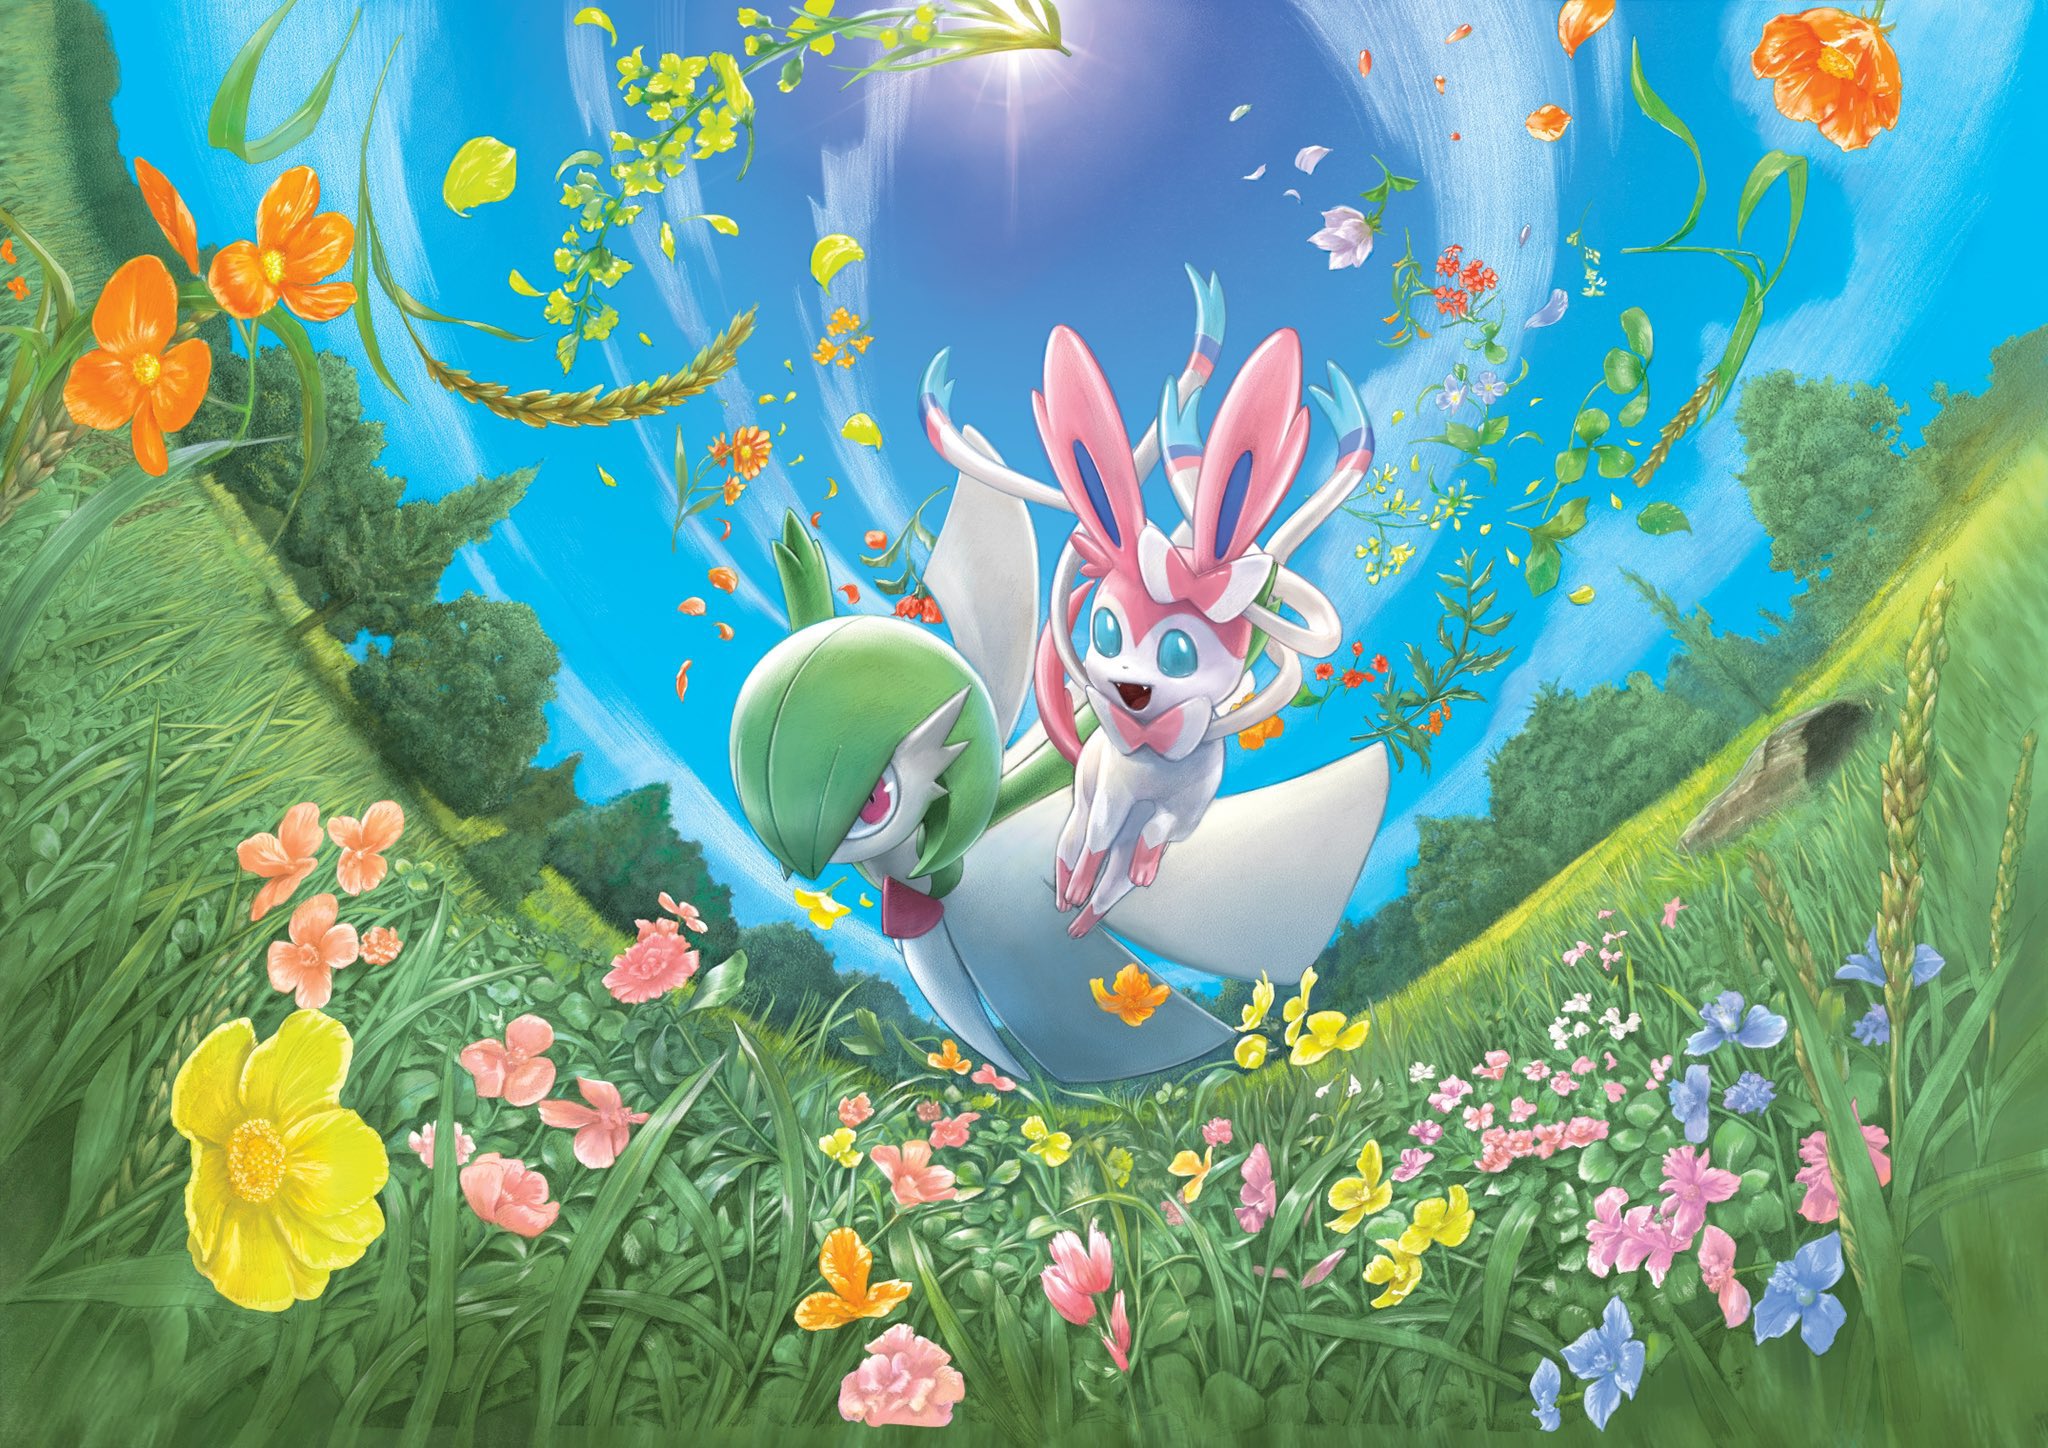 Shiny Sylveon Wallpaper  Shampazs Kofi Shop  Kofi  Where creators  get support from fans through donations memberships shop sales and more  The original Buy Me a Coffee Page